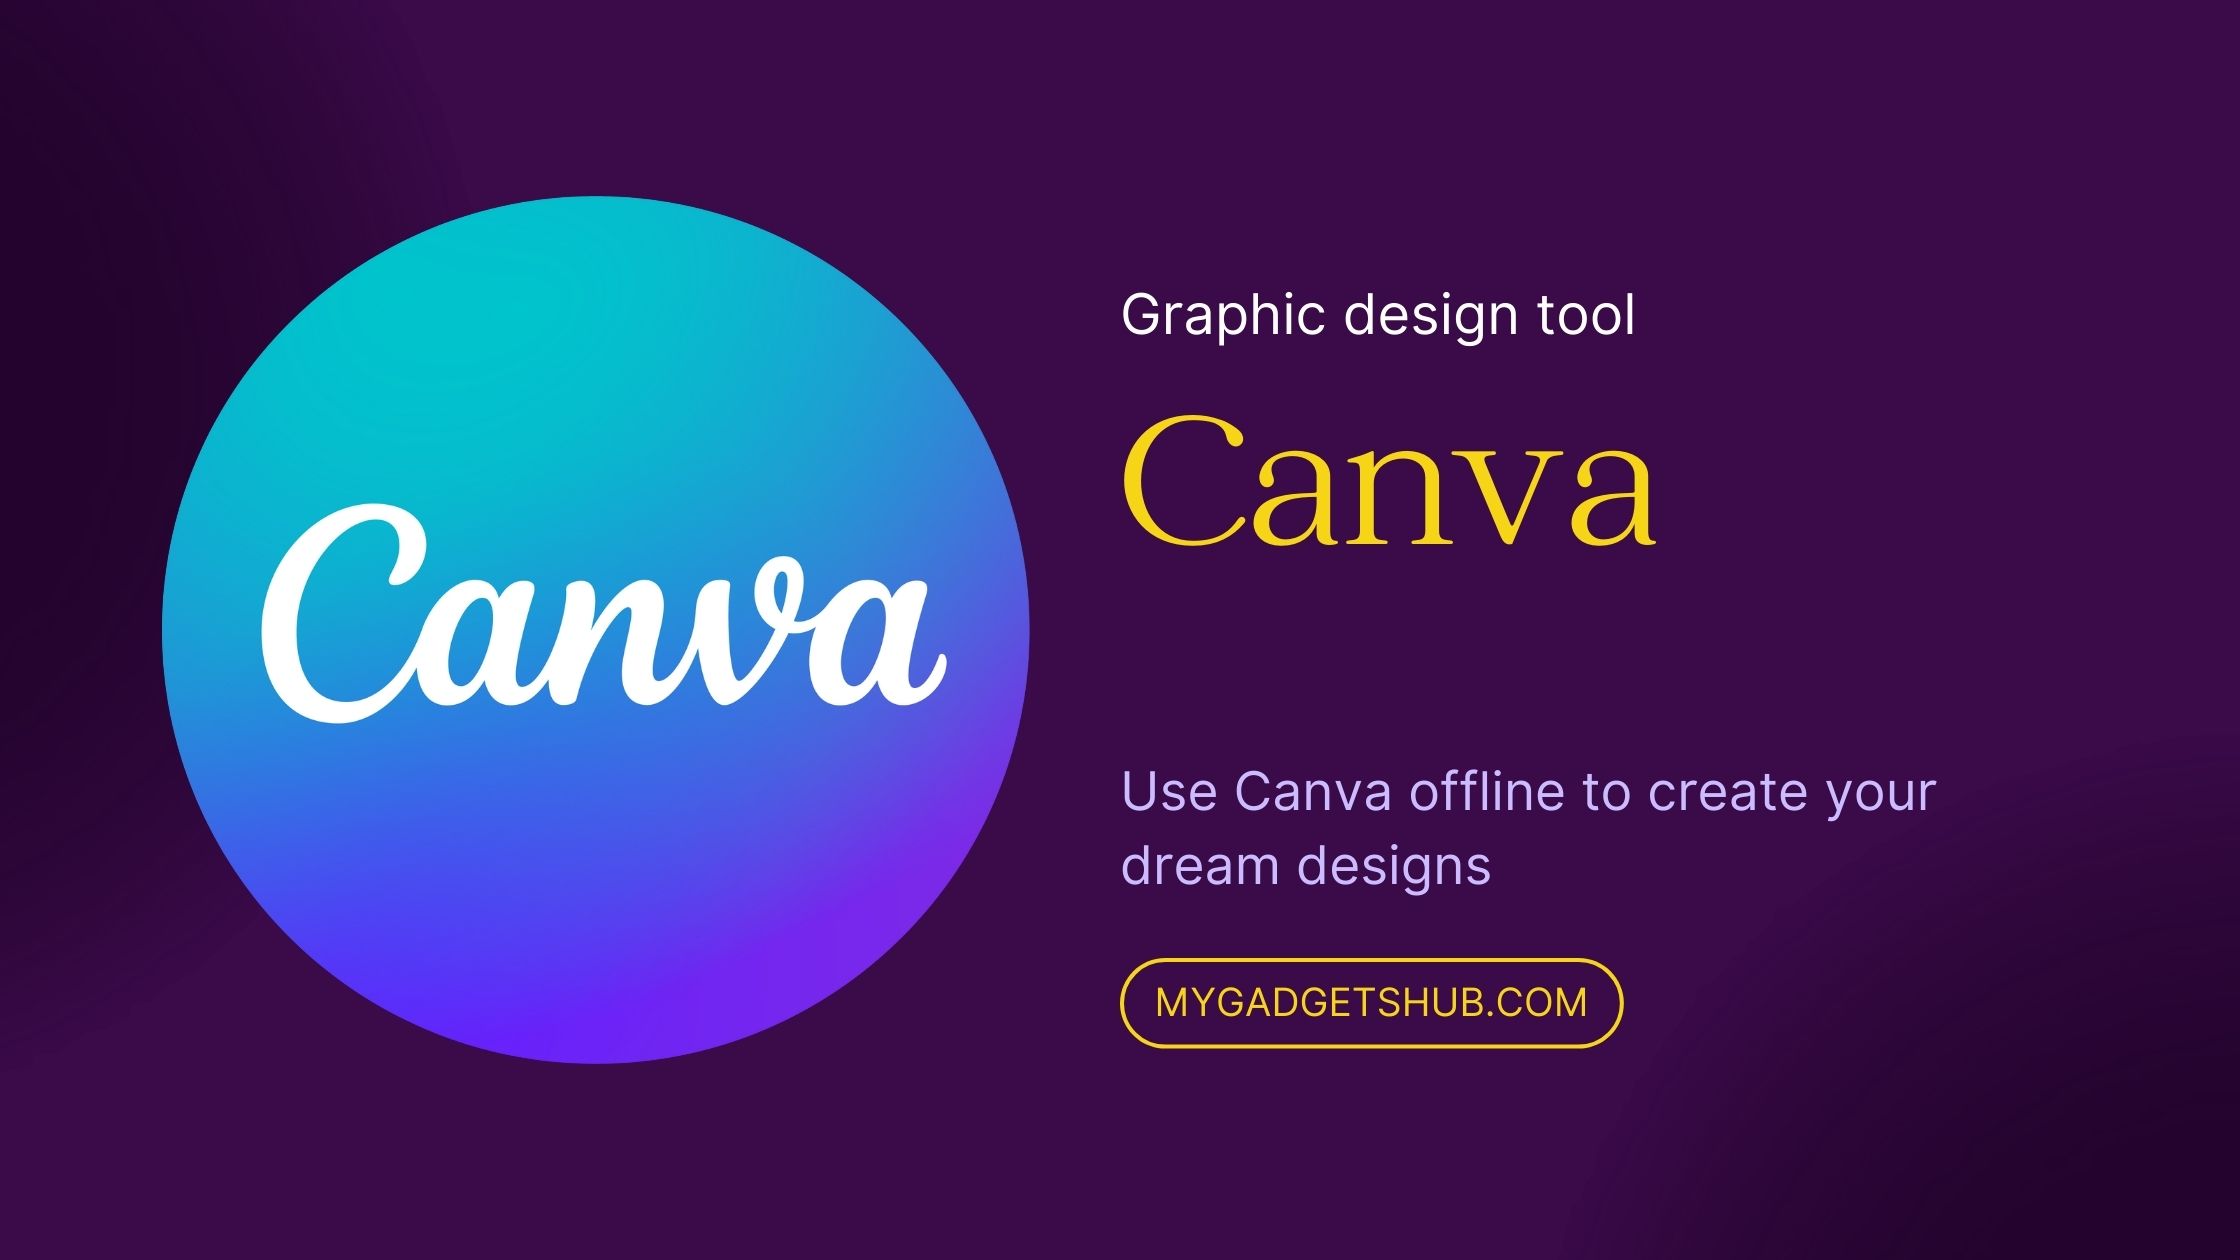 How to use Canva offline